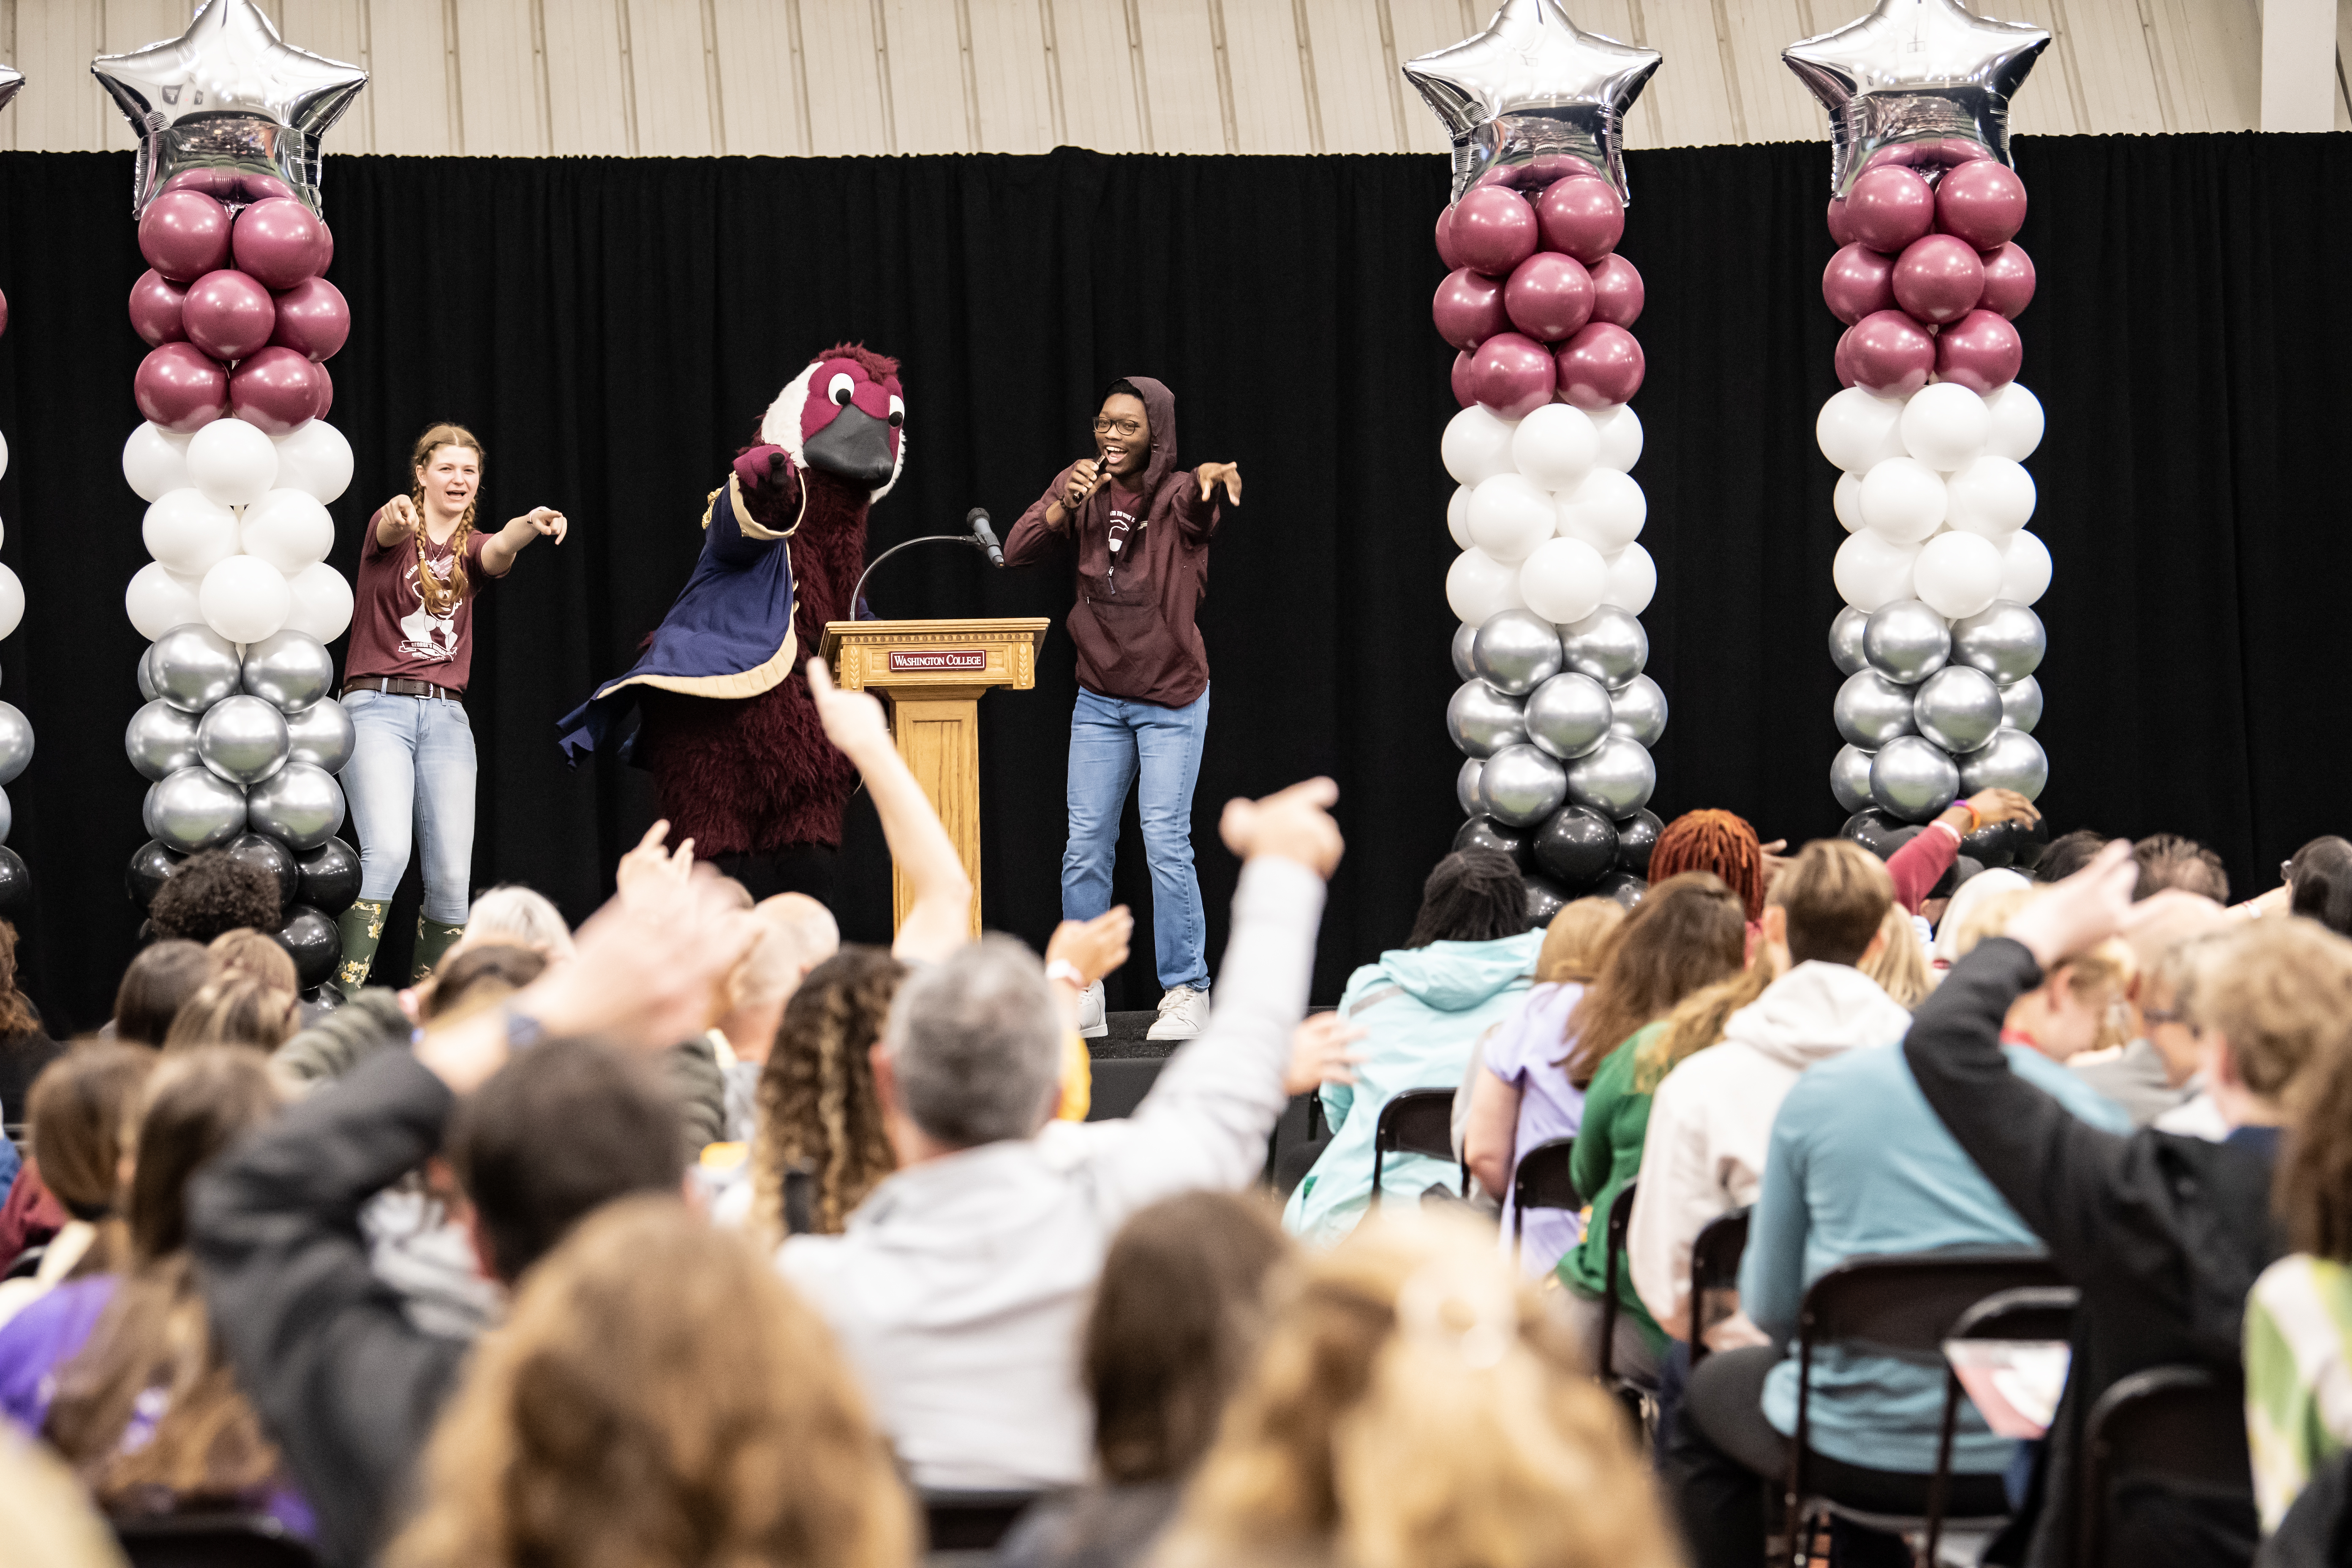 Washington College Students celebrating on Admitted Students Day